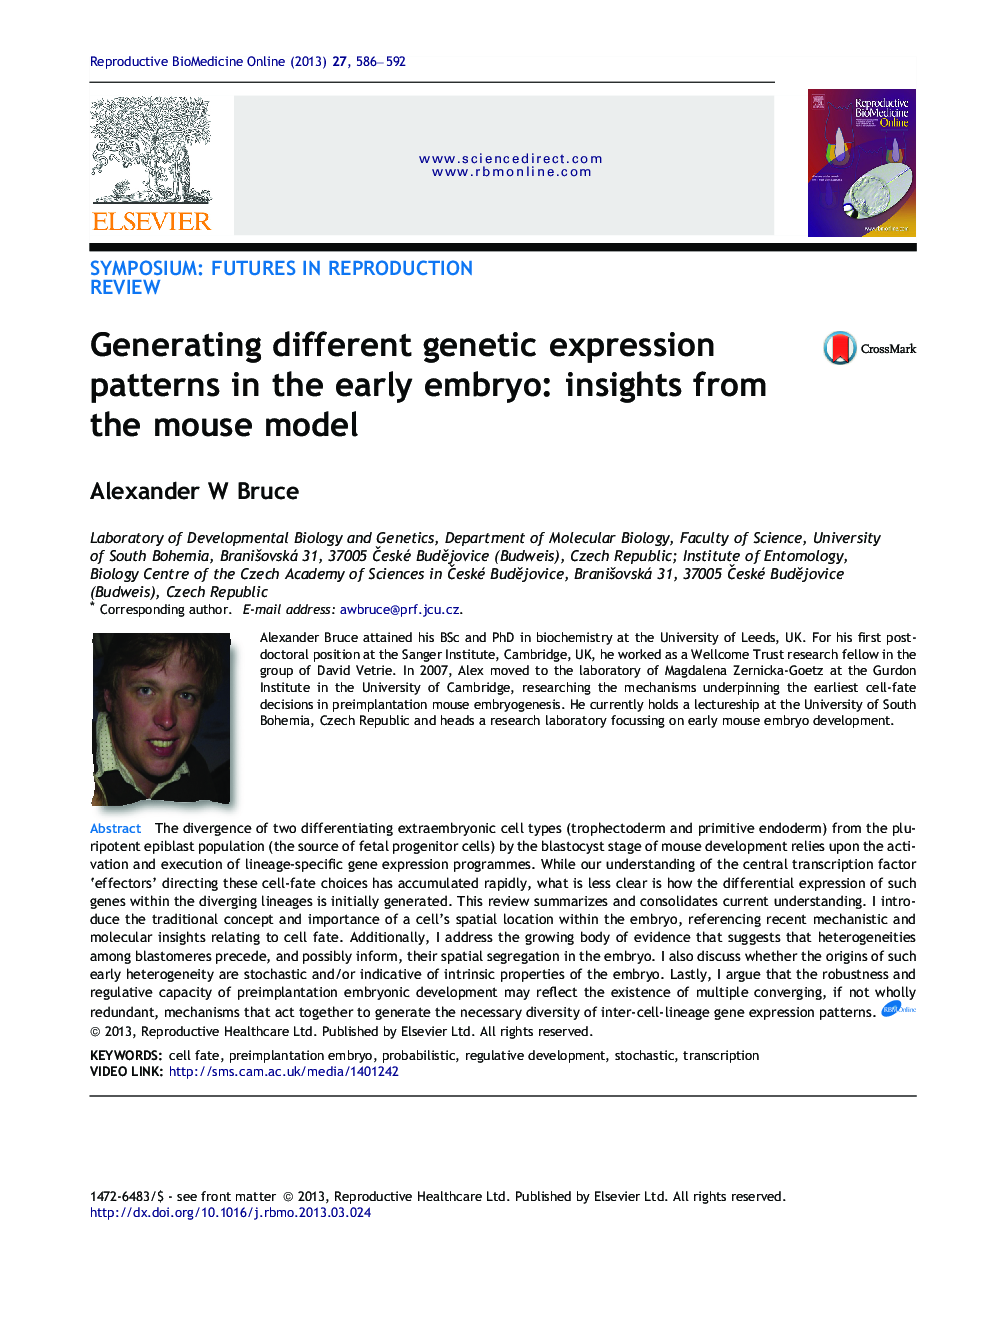 Generating different genetic expression patterns in the early embryo: insights from the mouse model 